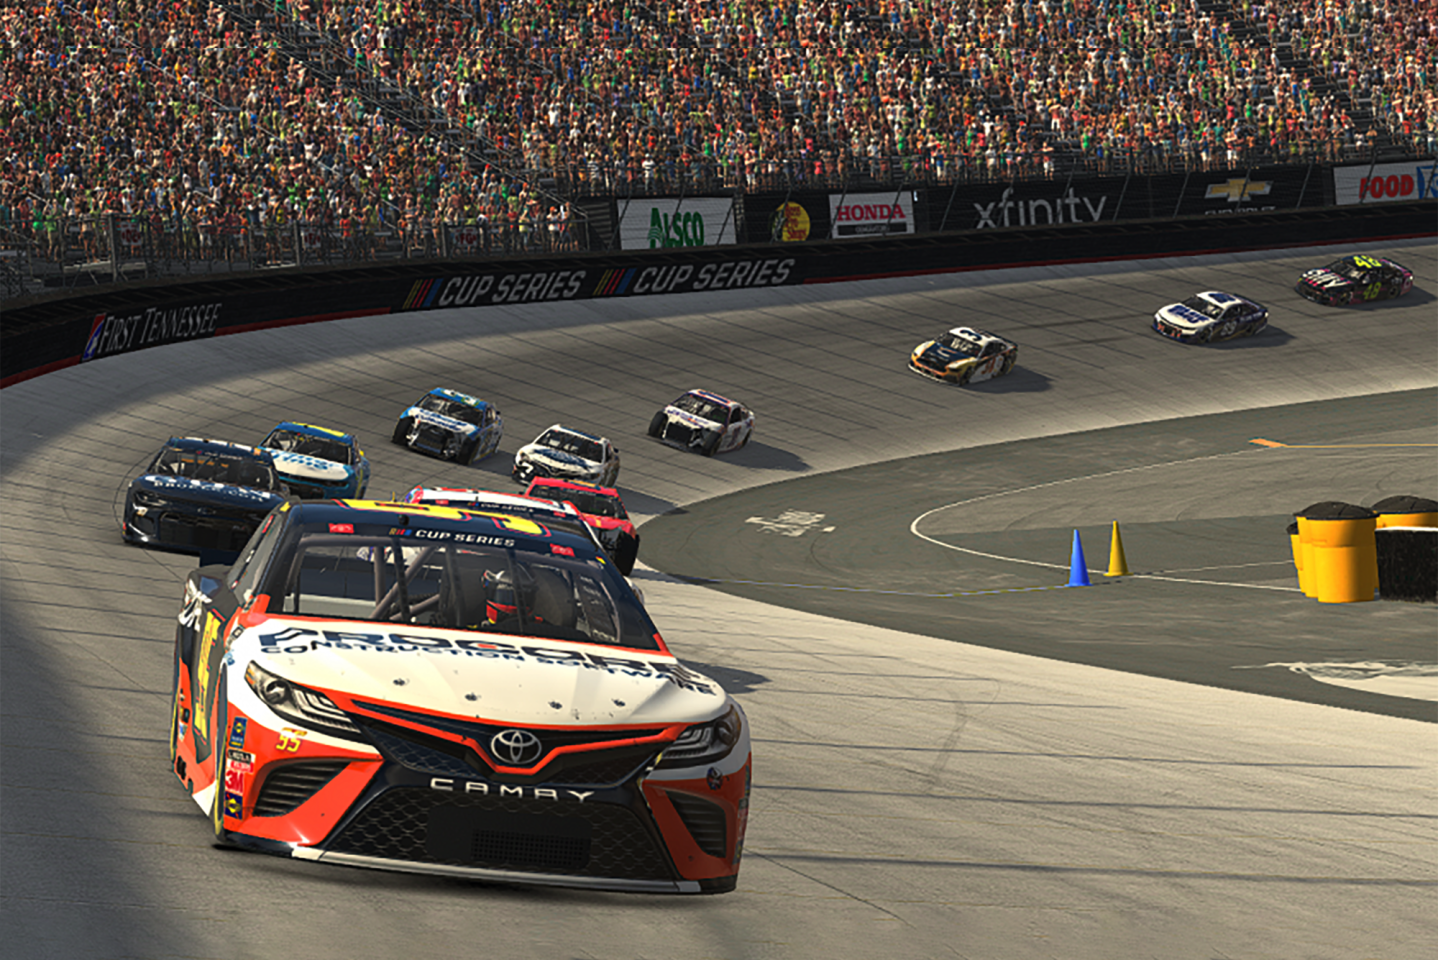 The eNASCAR iRacing Pro Invitational Series moves to virtual Richmond Raceway for the Toyota Owners 150 presented by Toyota, just as was originally planned for the real world series prior to lockdown